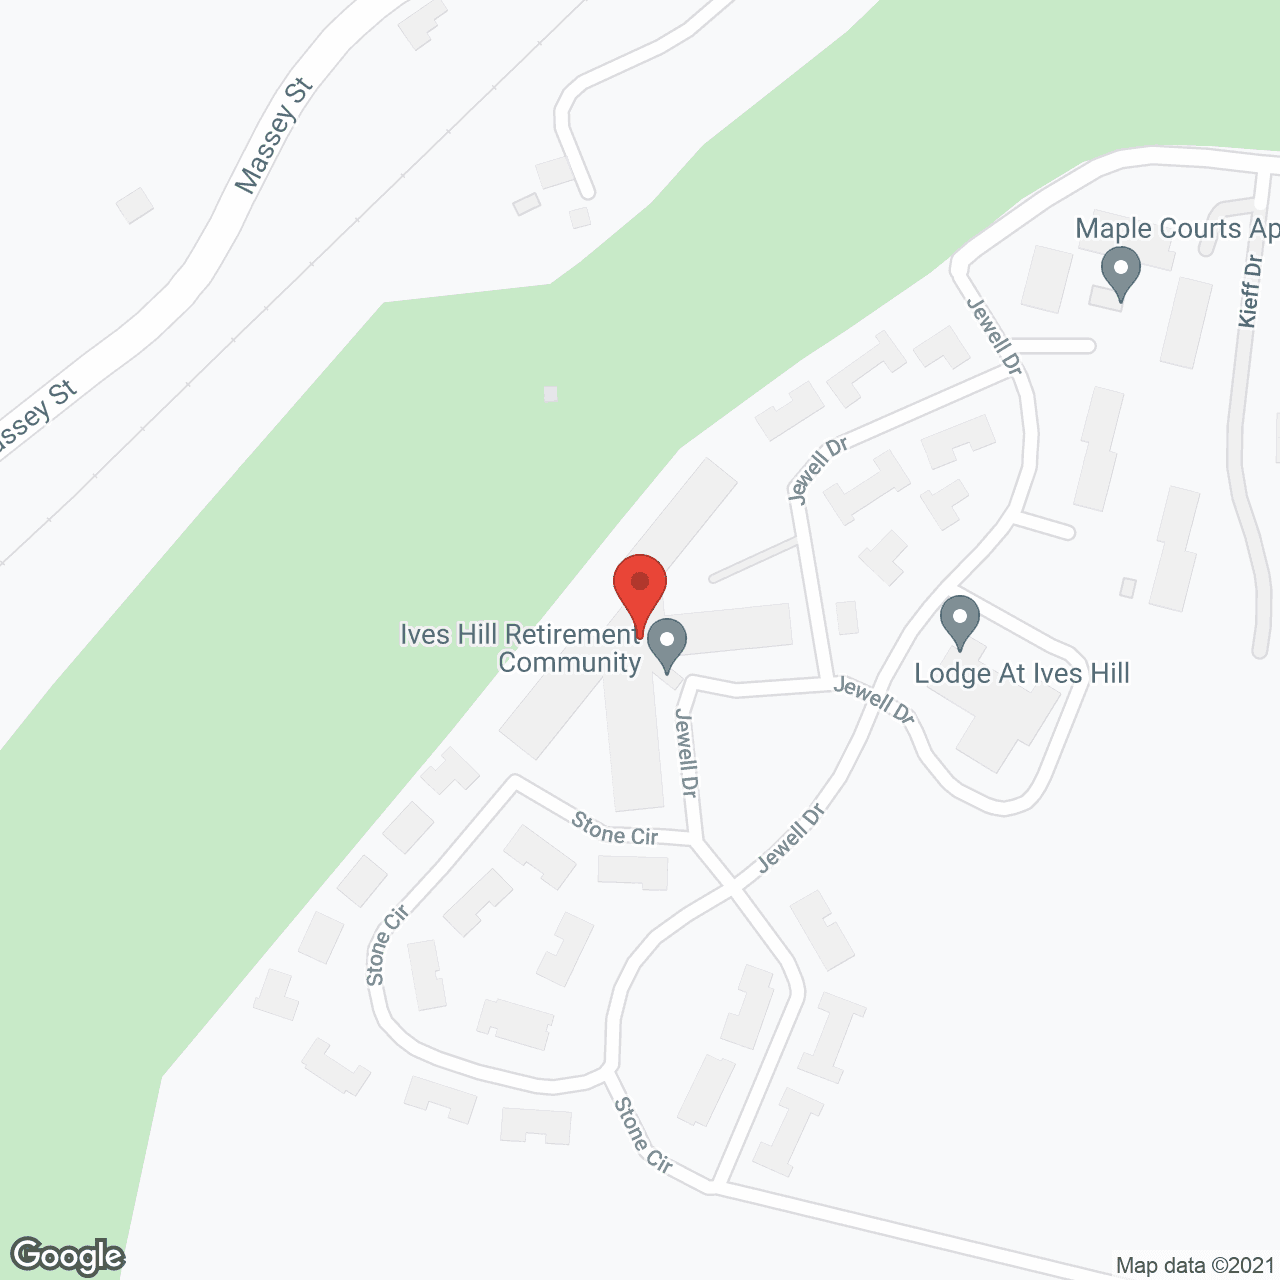 Ives Hill Retirement Community in google map